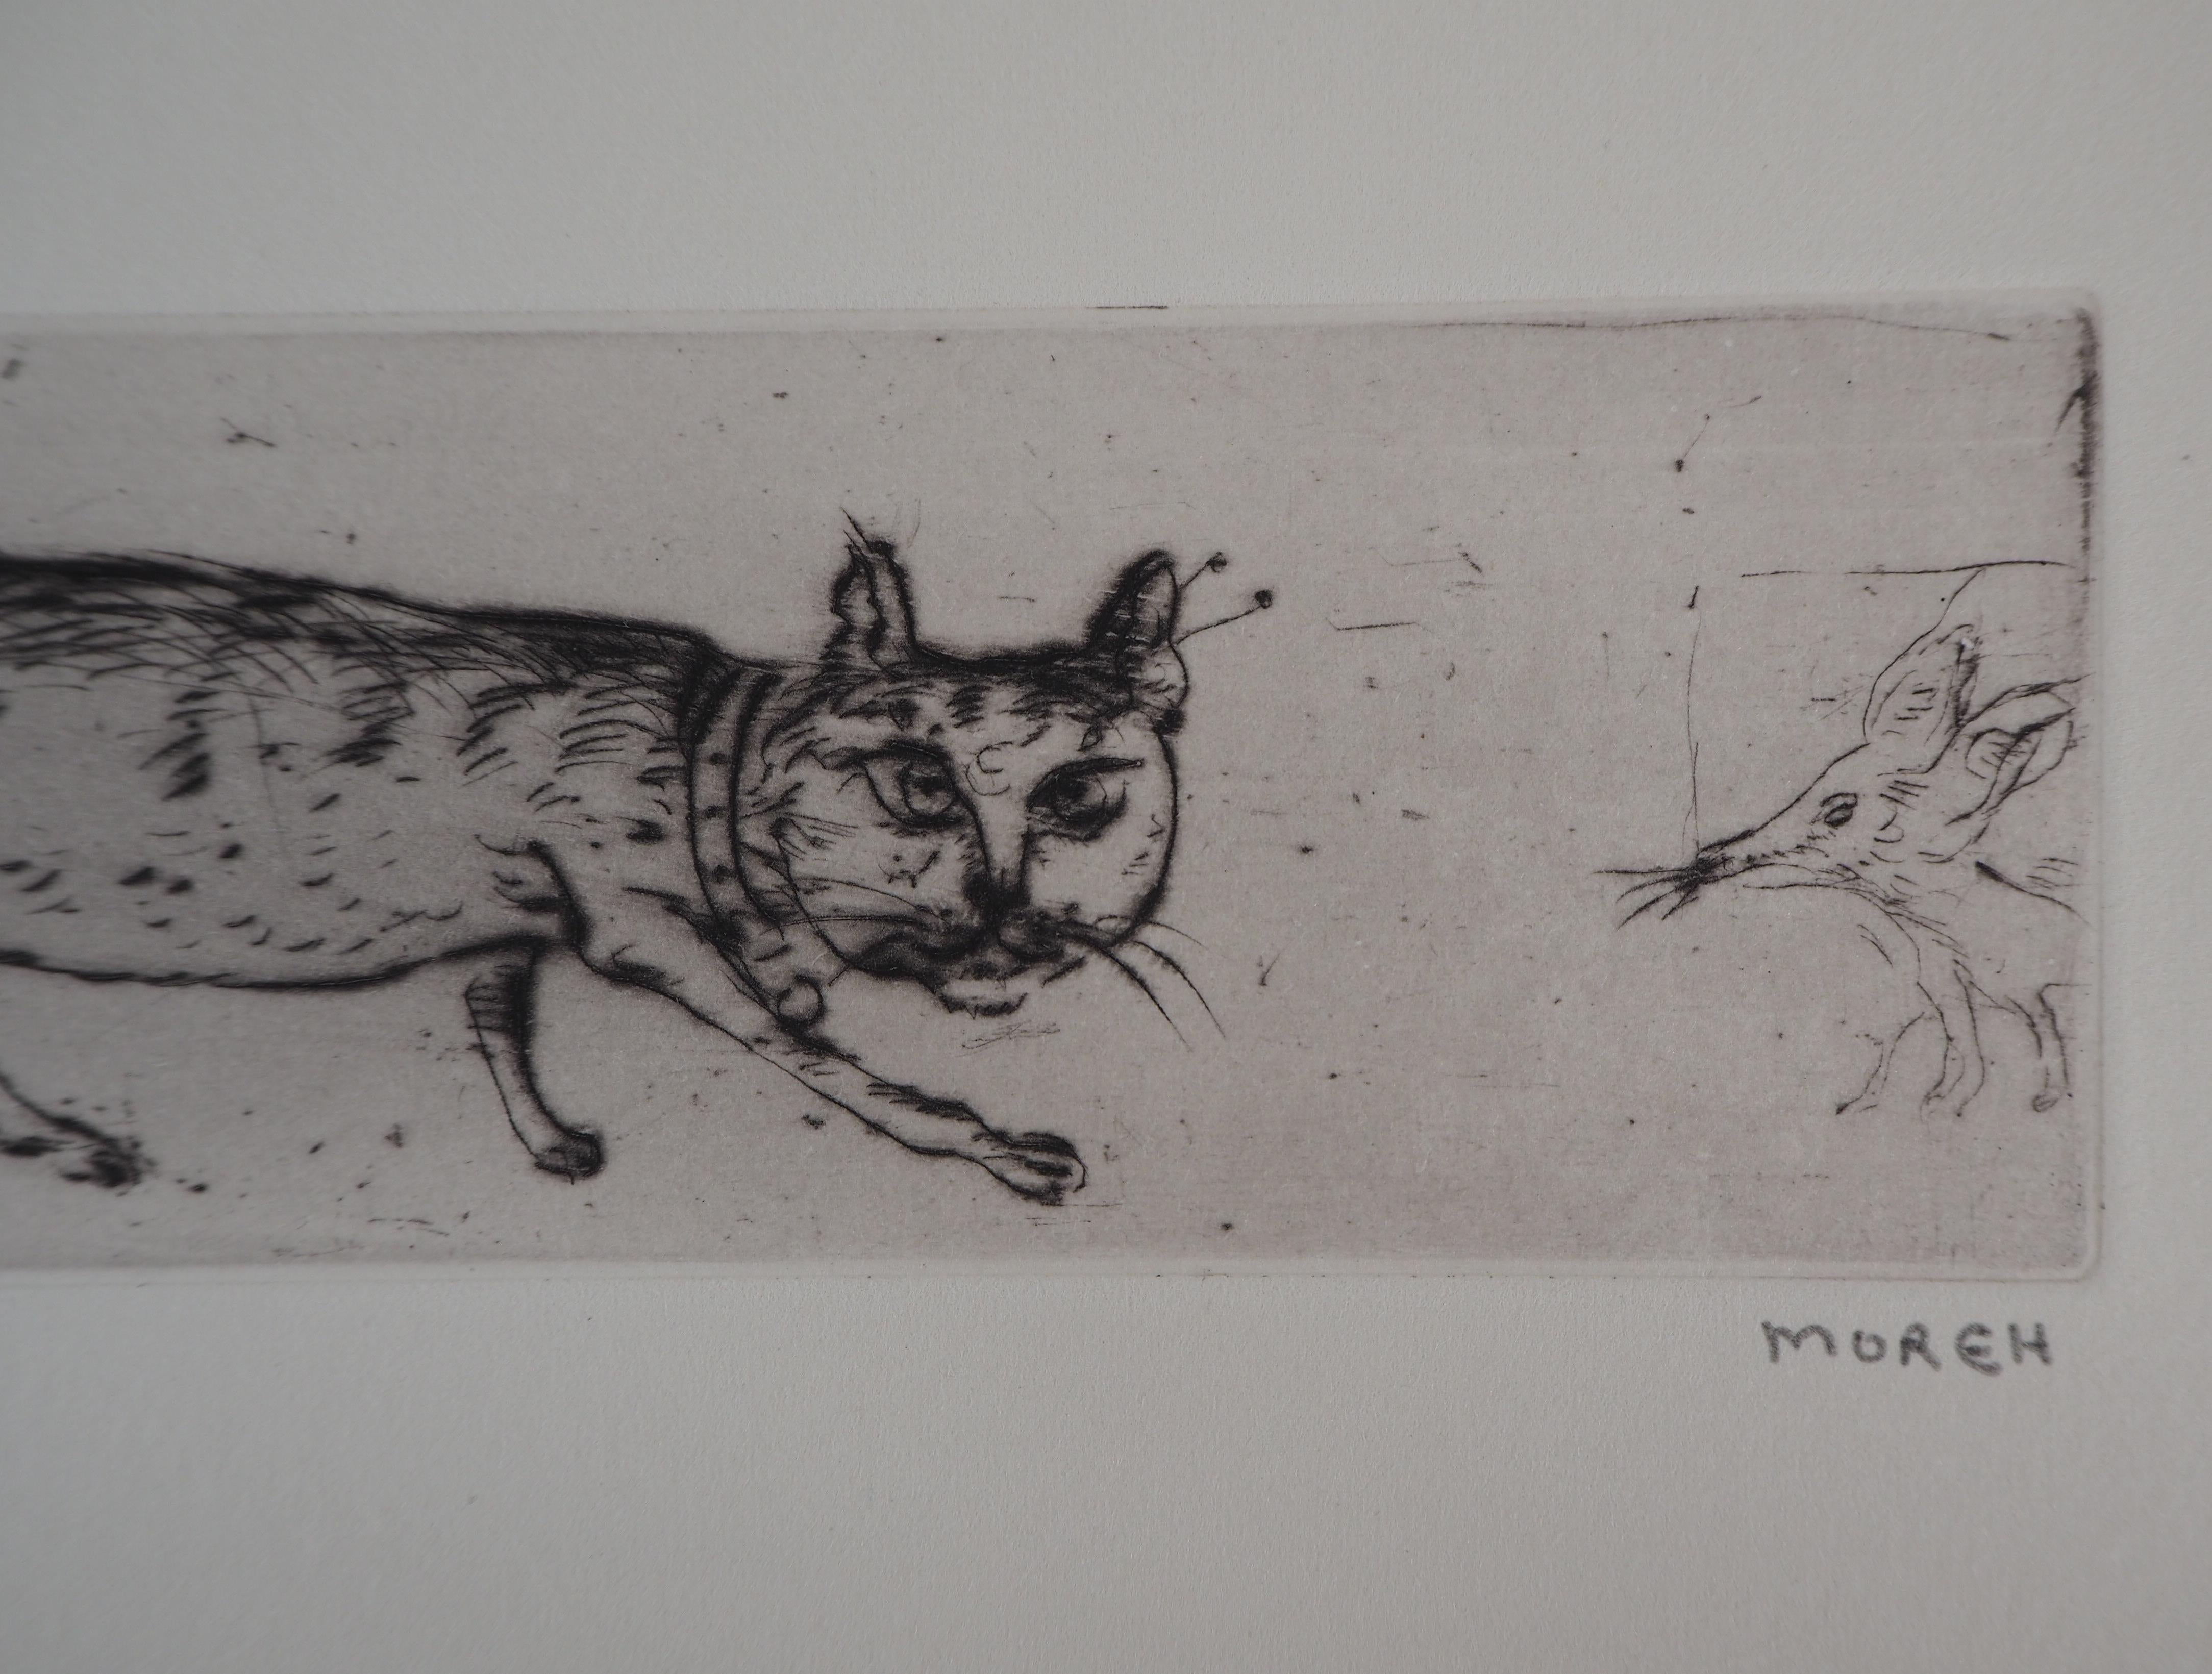 Mordecai MOREH
Cat and Mouse 

Original etching
Handsigned in pencil
Numbered / 300
On vellum 9 x 21 cm (c. 4 x 8 inch)

INFORMATION : This etching was created for the Greeting Card of Galerie Michele Broutta

Excellent condition